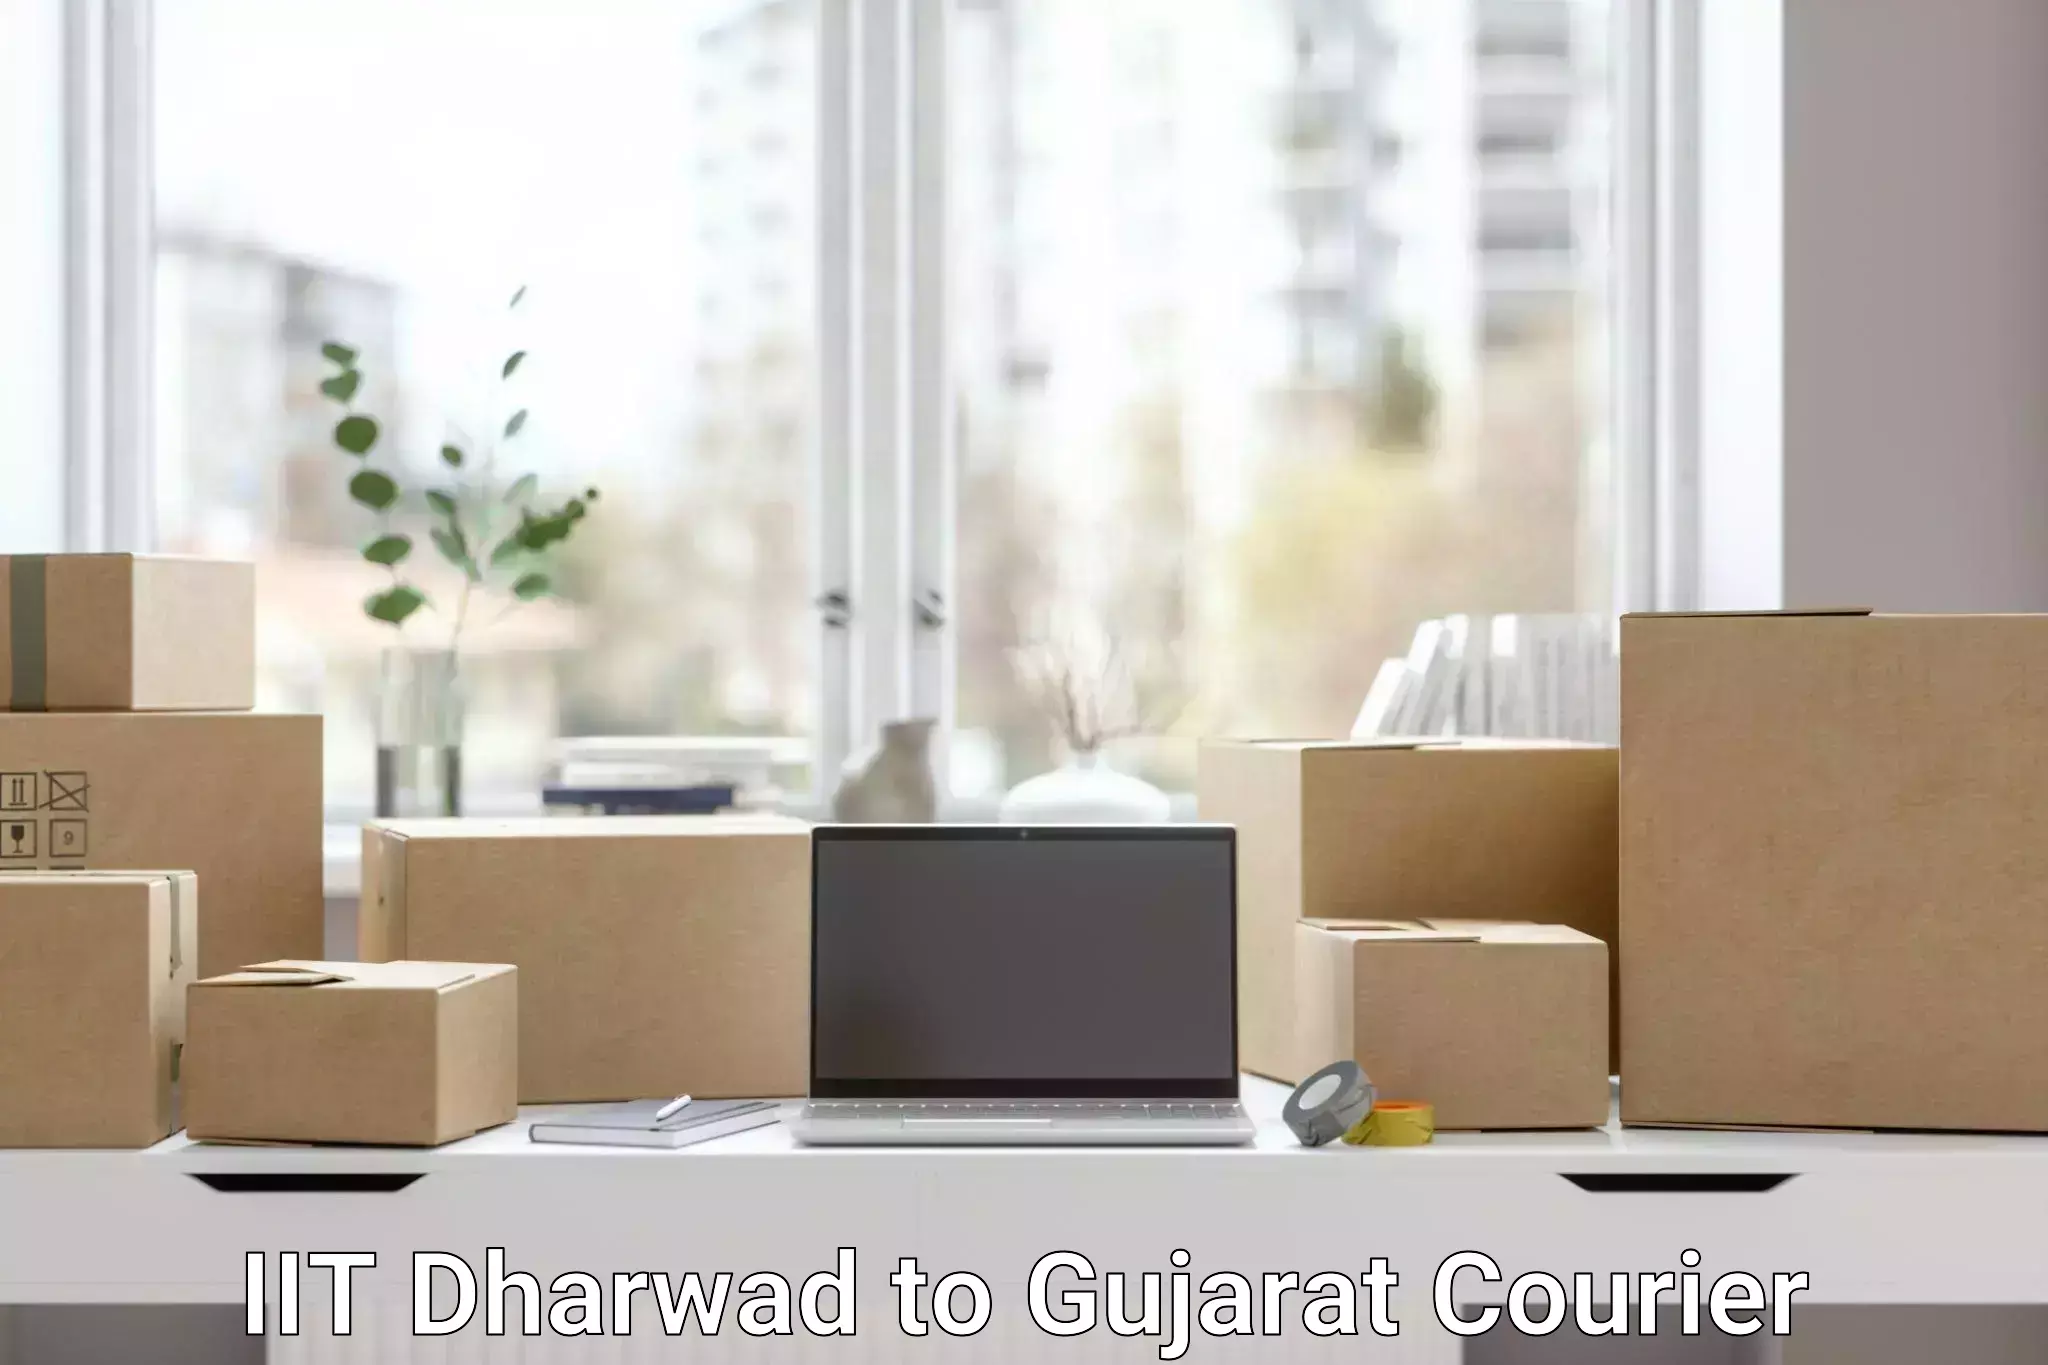 Courier service partnerships IIT Dharwad to Ankleshwar